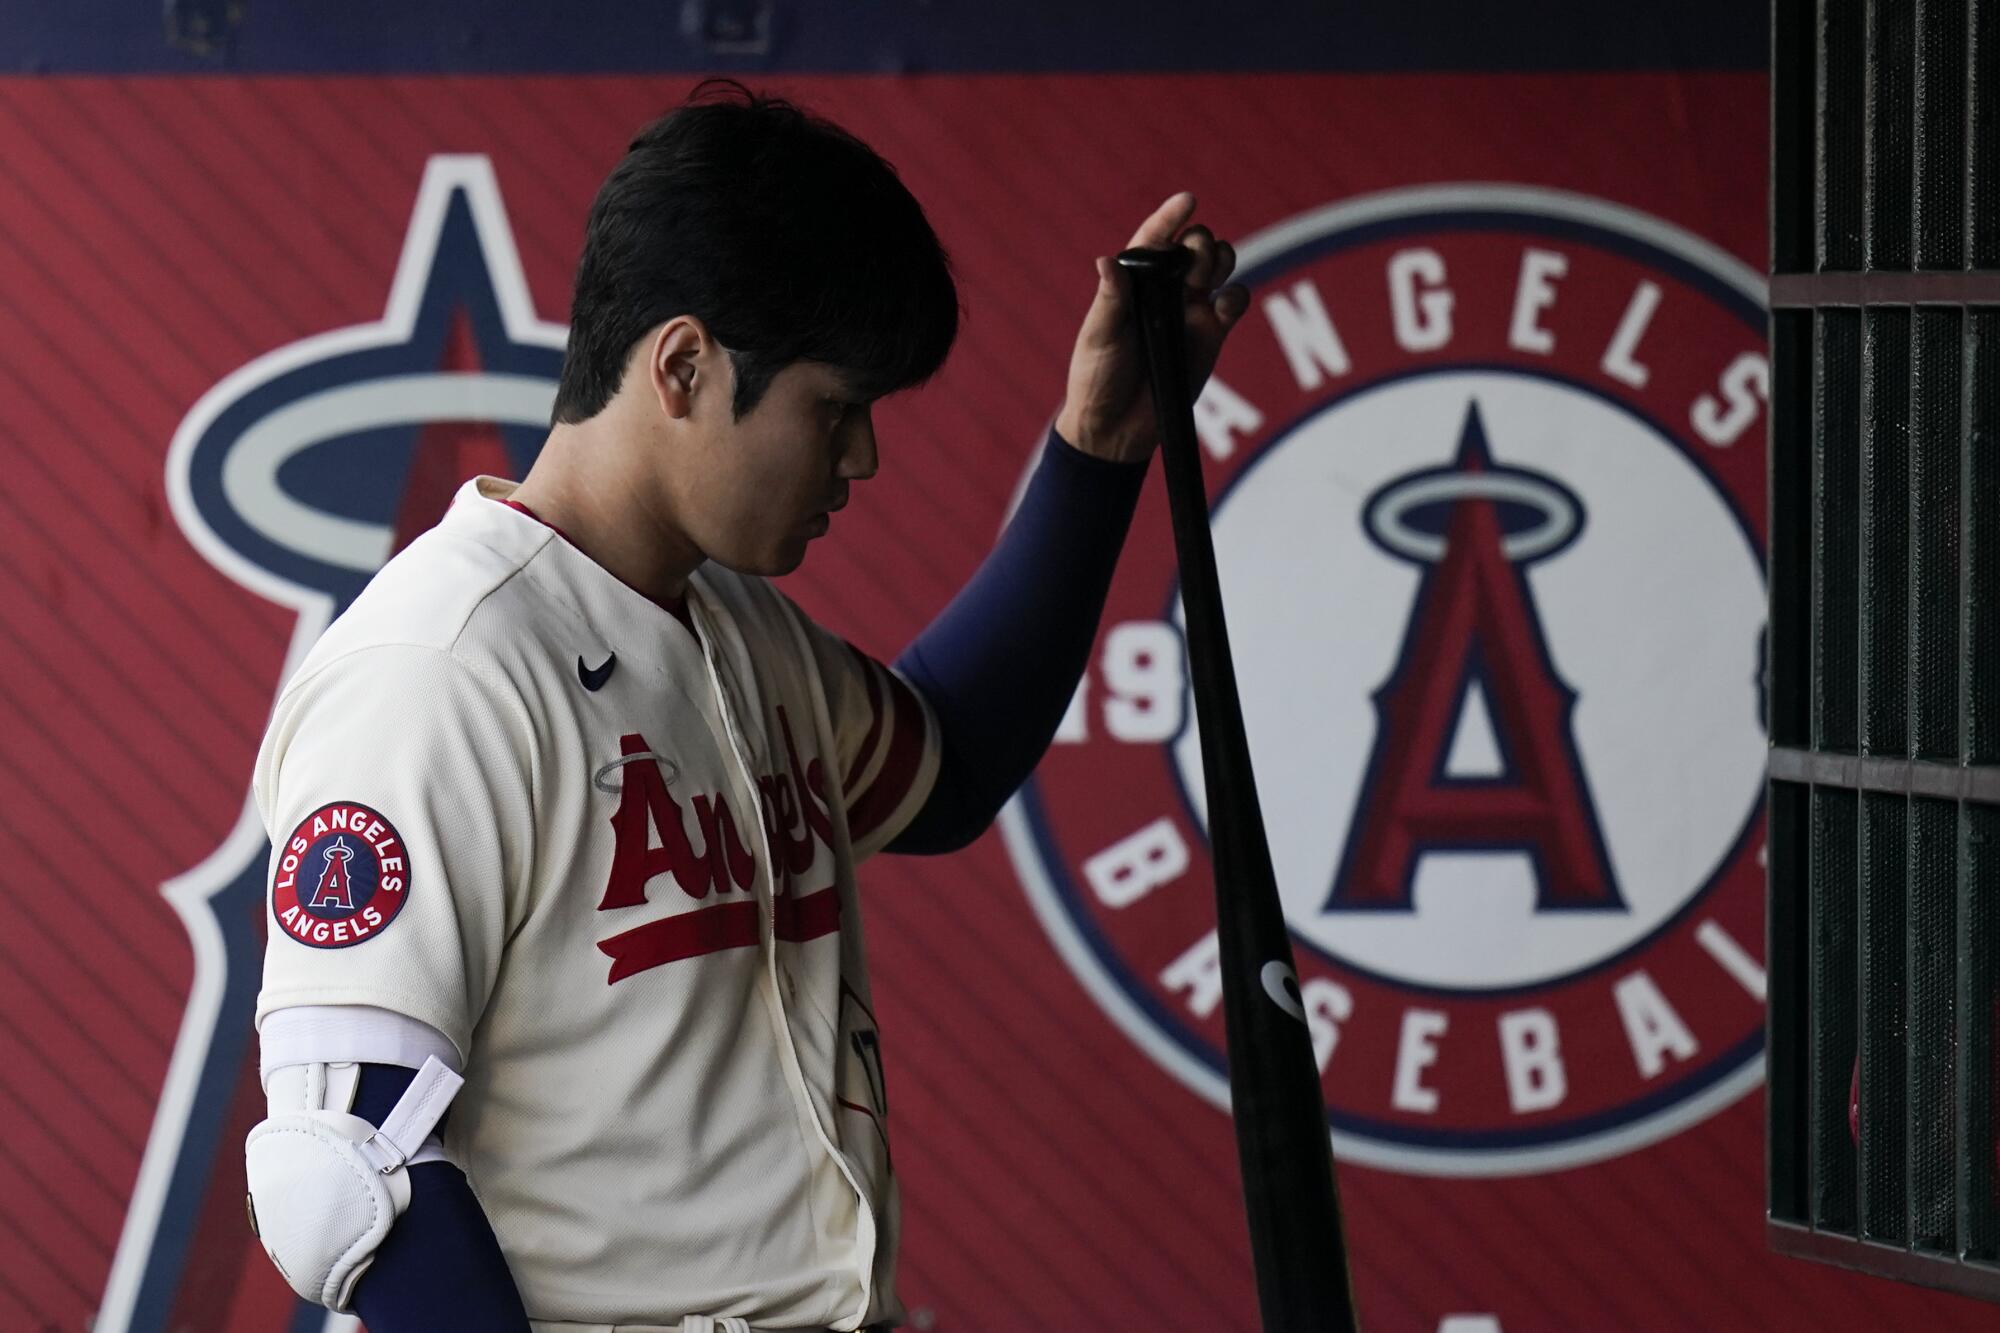 Angels two-way star Shohei Ohtani grabs his bat during a game.